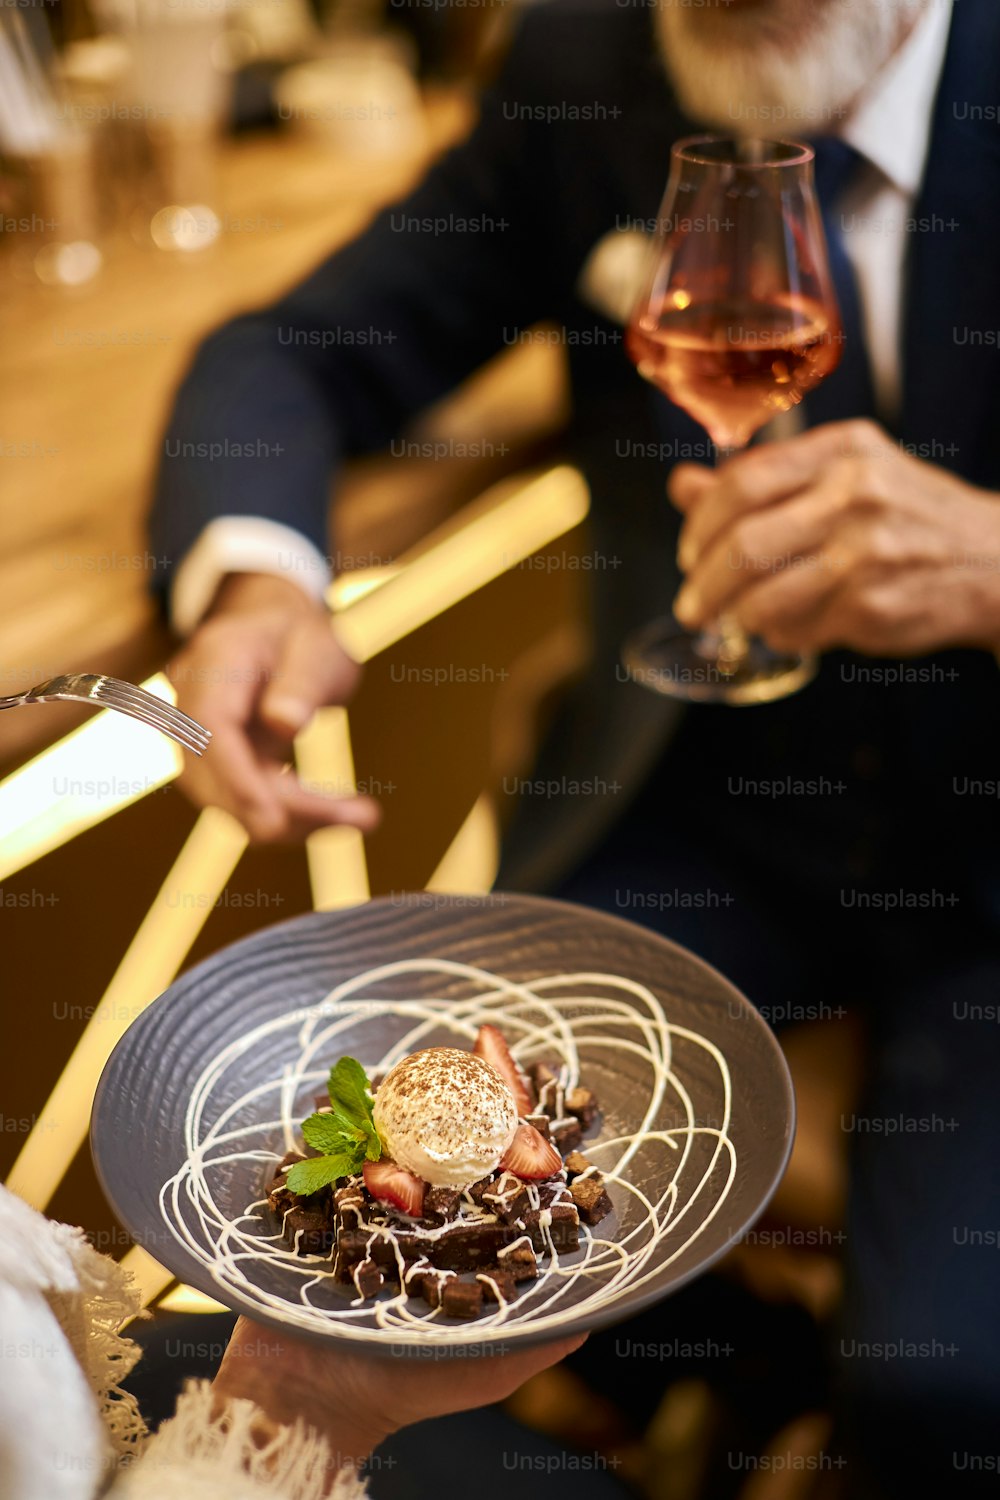 Close image of hand with glass of champagne, sweet dessert on grey dish. Beared man in tuxedo drinking